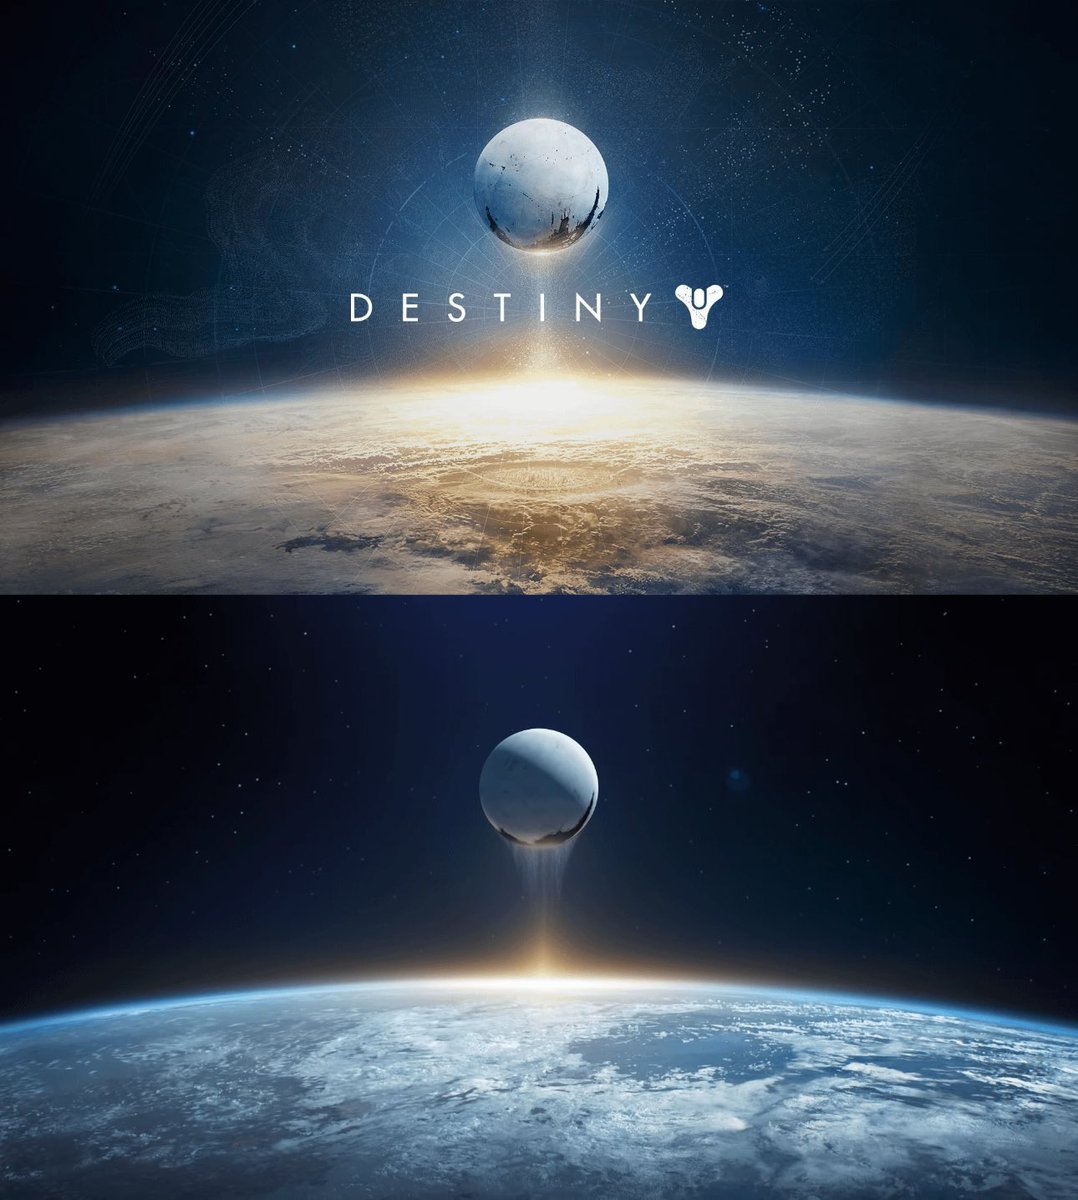 10 years. 2014 - 2024 | #Destiny2 

🥺 we’ve come a long way